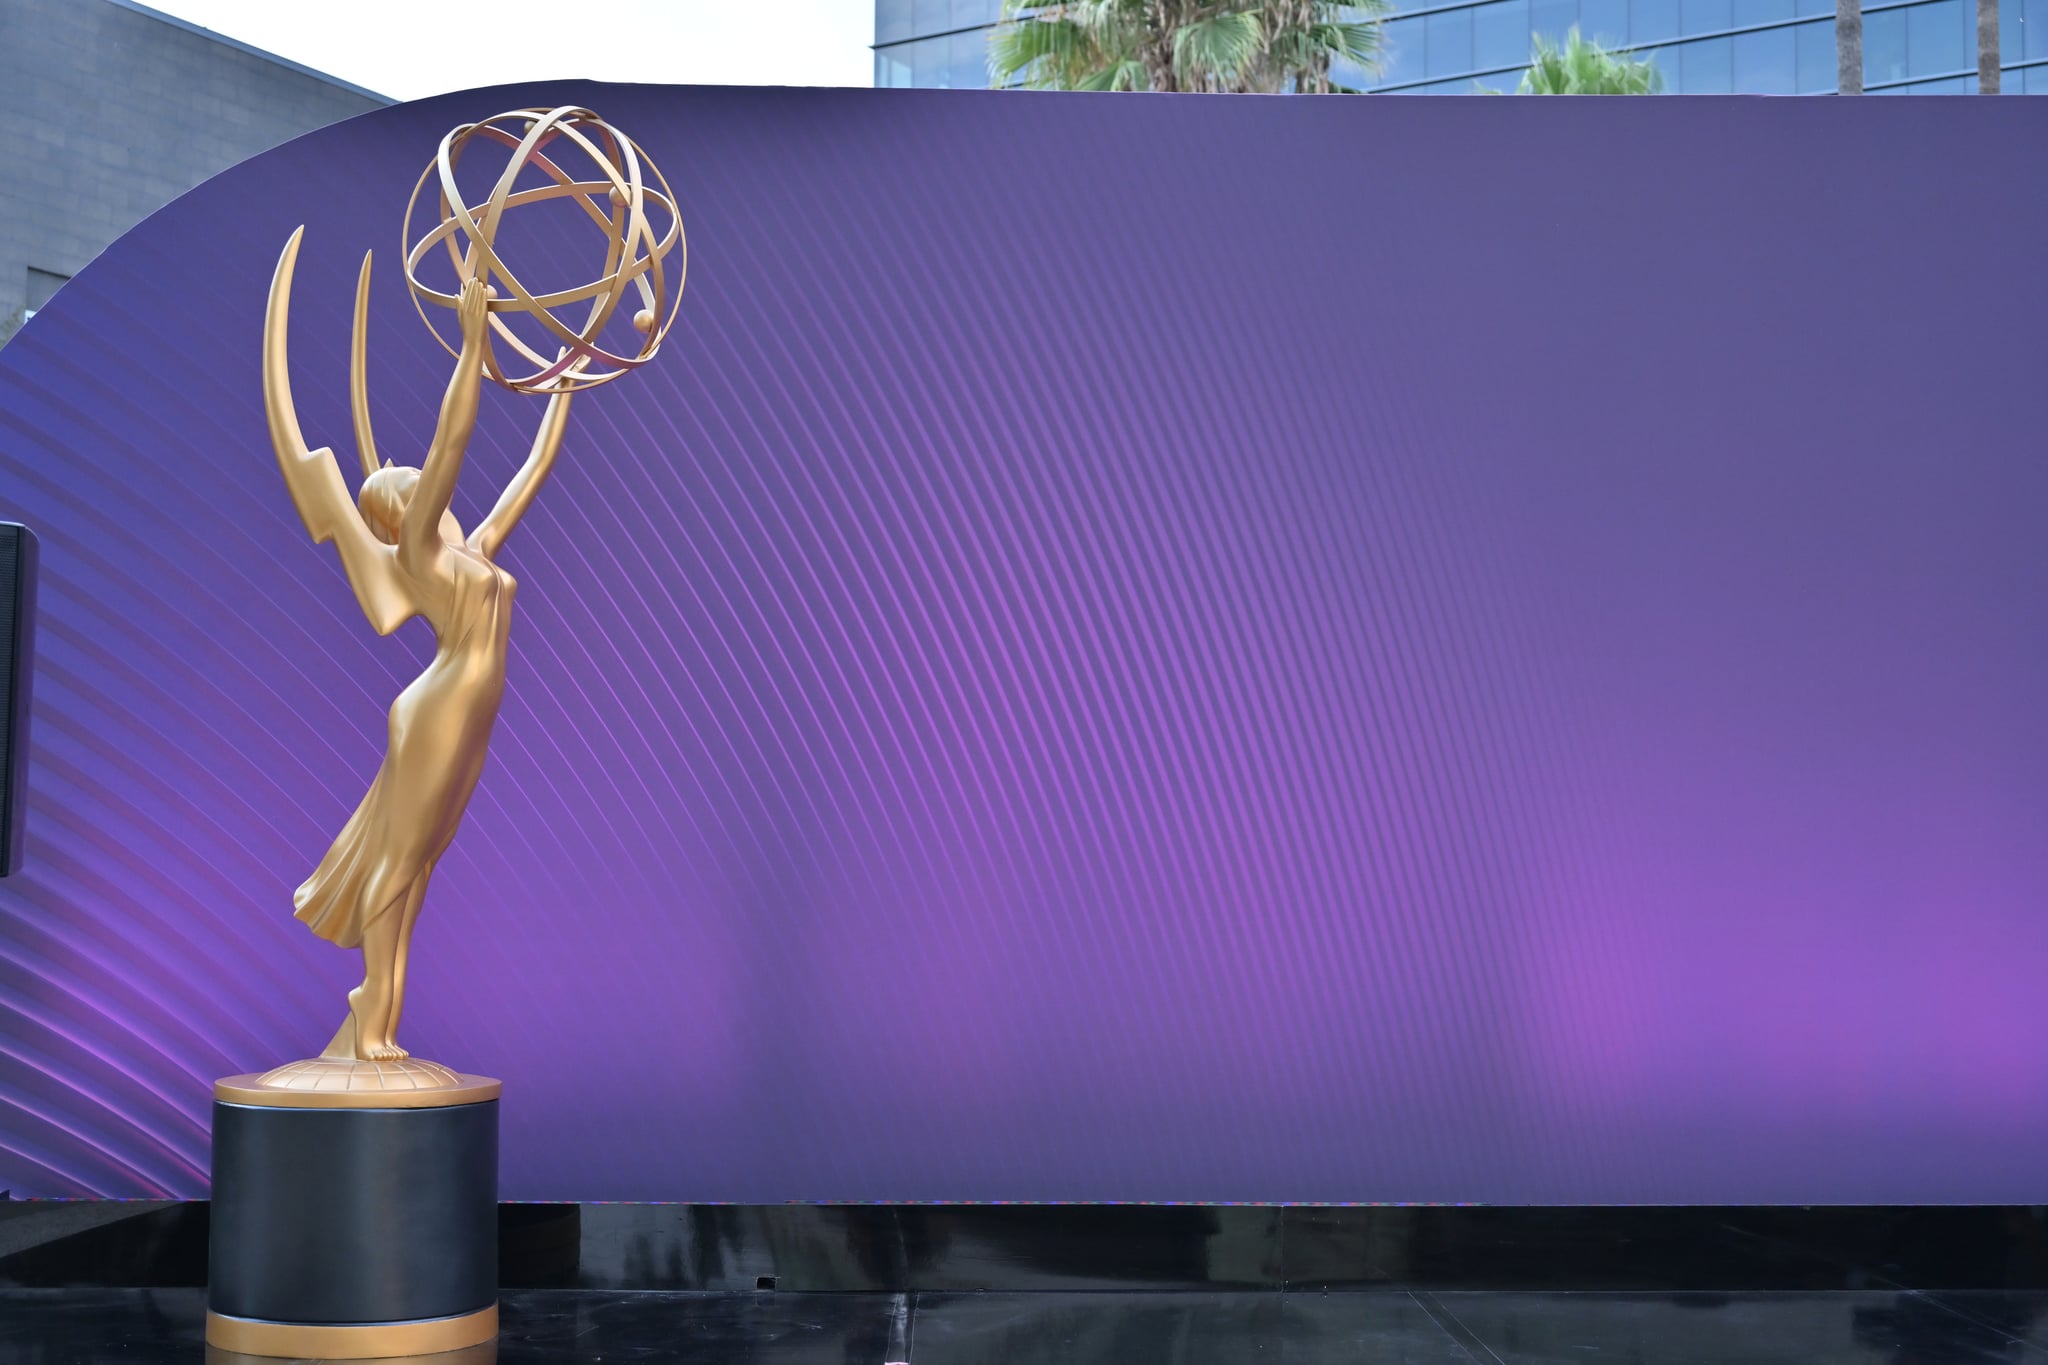 A view of the Emmy statue at the press preview for the 74th Primetime Emmy Awards at the Academy of Television Arts and Sciences on September 8, 2022 in North Hollywood, California. (Photo by Michael Buckner/Variety via Getty Images)